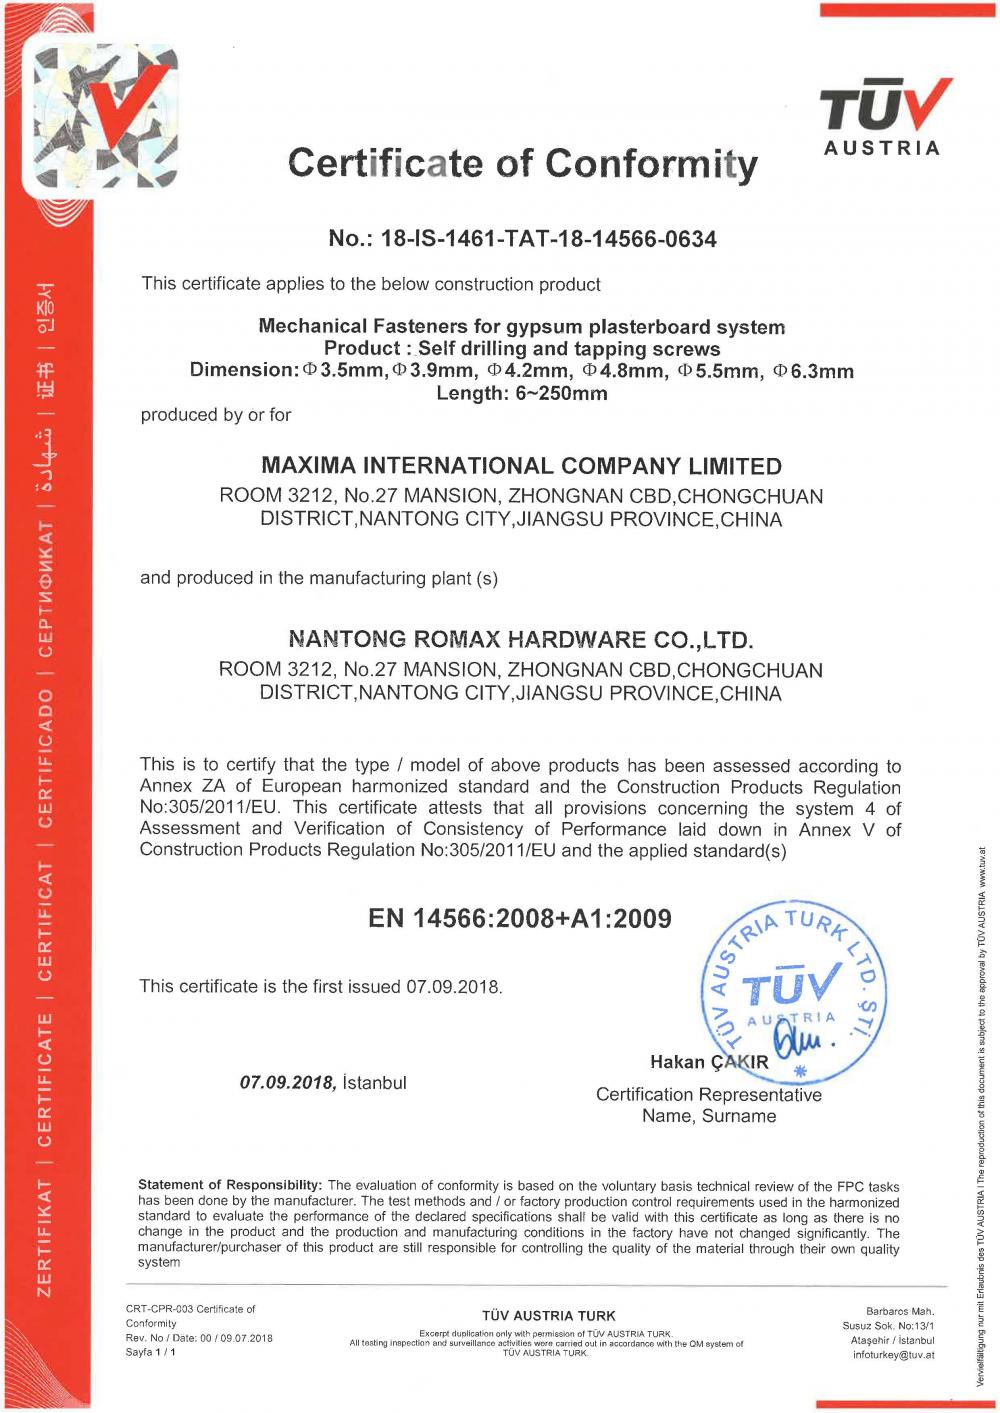 EN14566 CERTIFICATE OF CONFORMITY SELF DRILLING AND TAPPING SCREWS